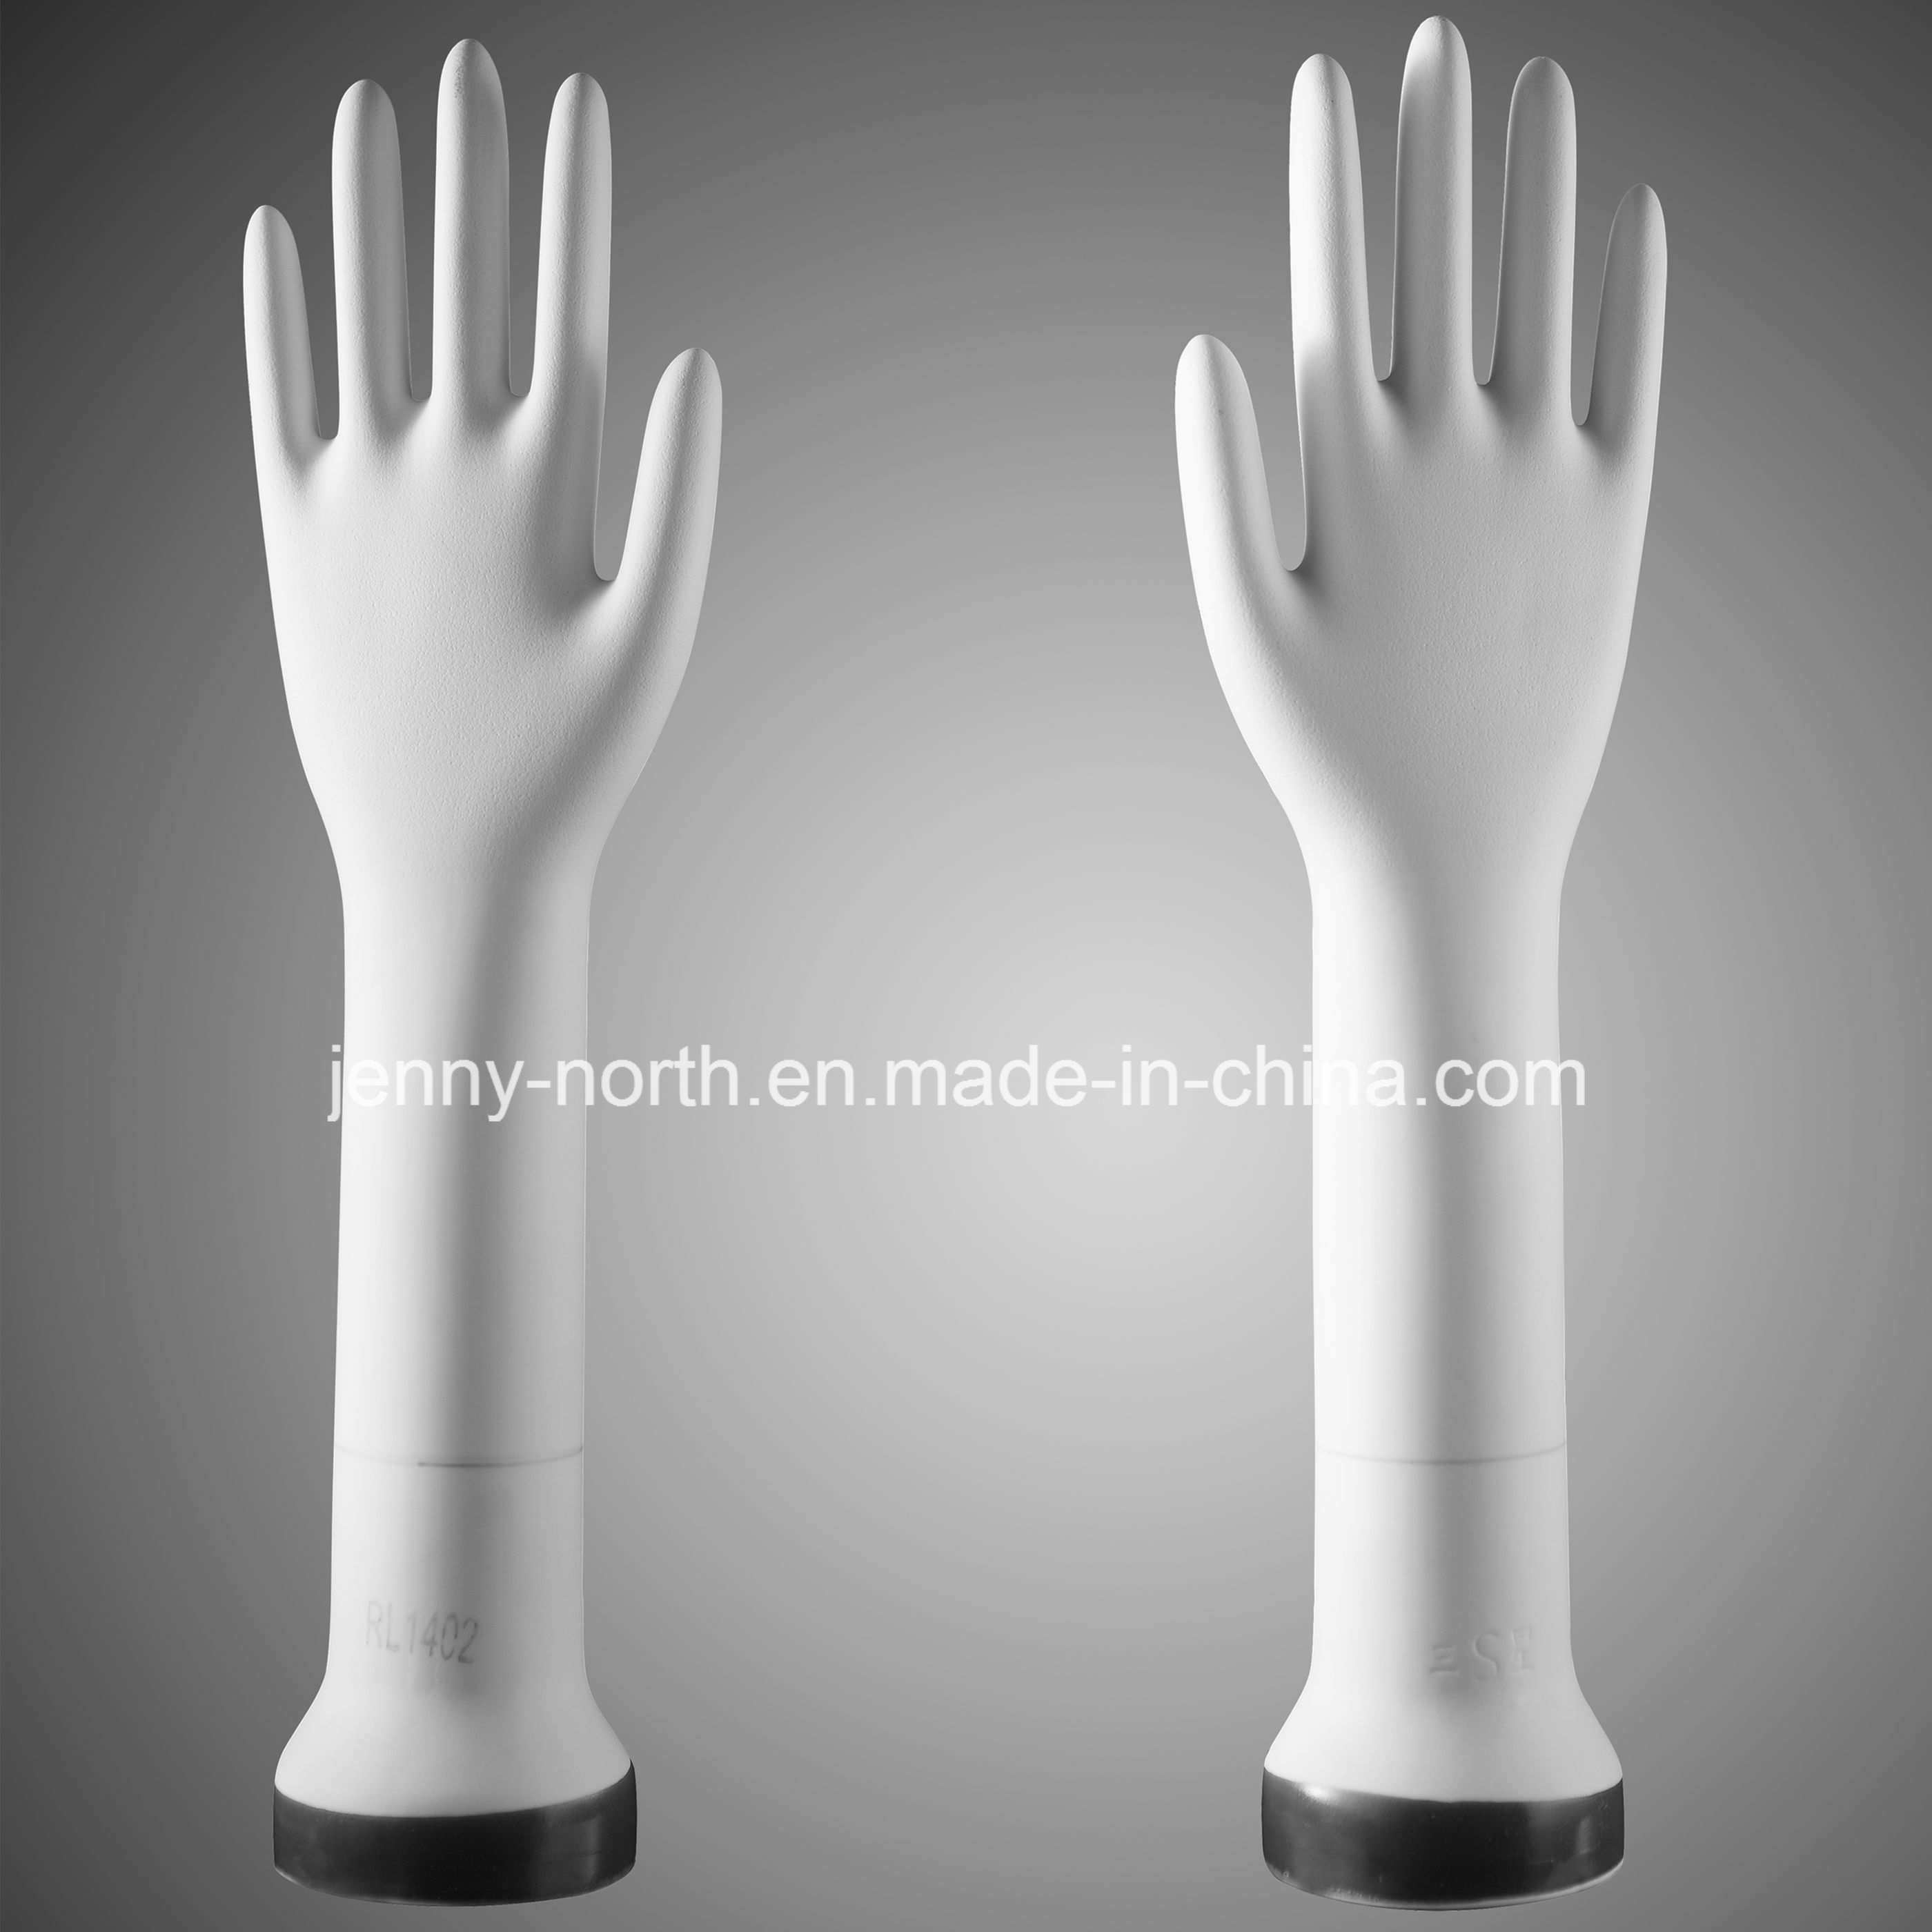 Pitted Straight Ceramic Mold for Examination Gloves